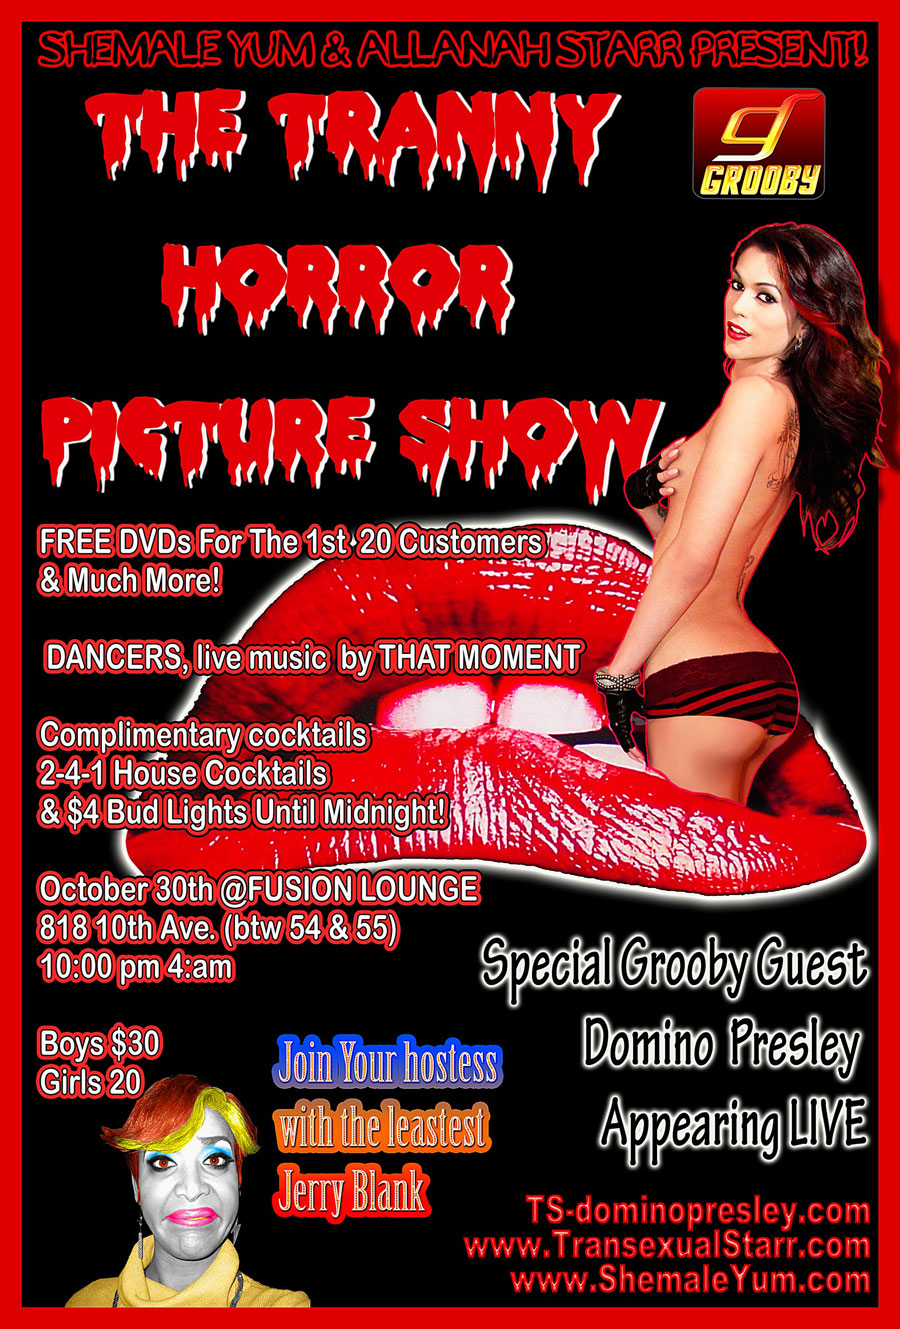 Join Shemale Pornstar Domino Presley For Halloween Hijinks This Year!